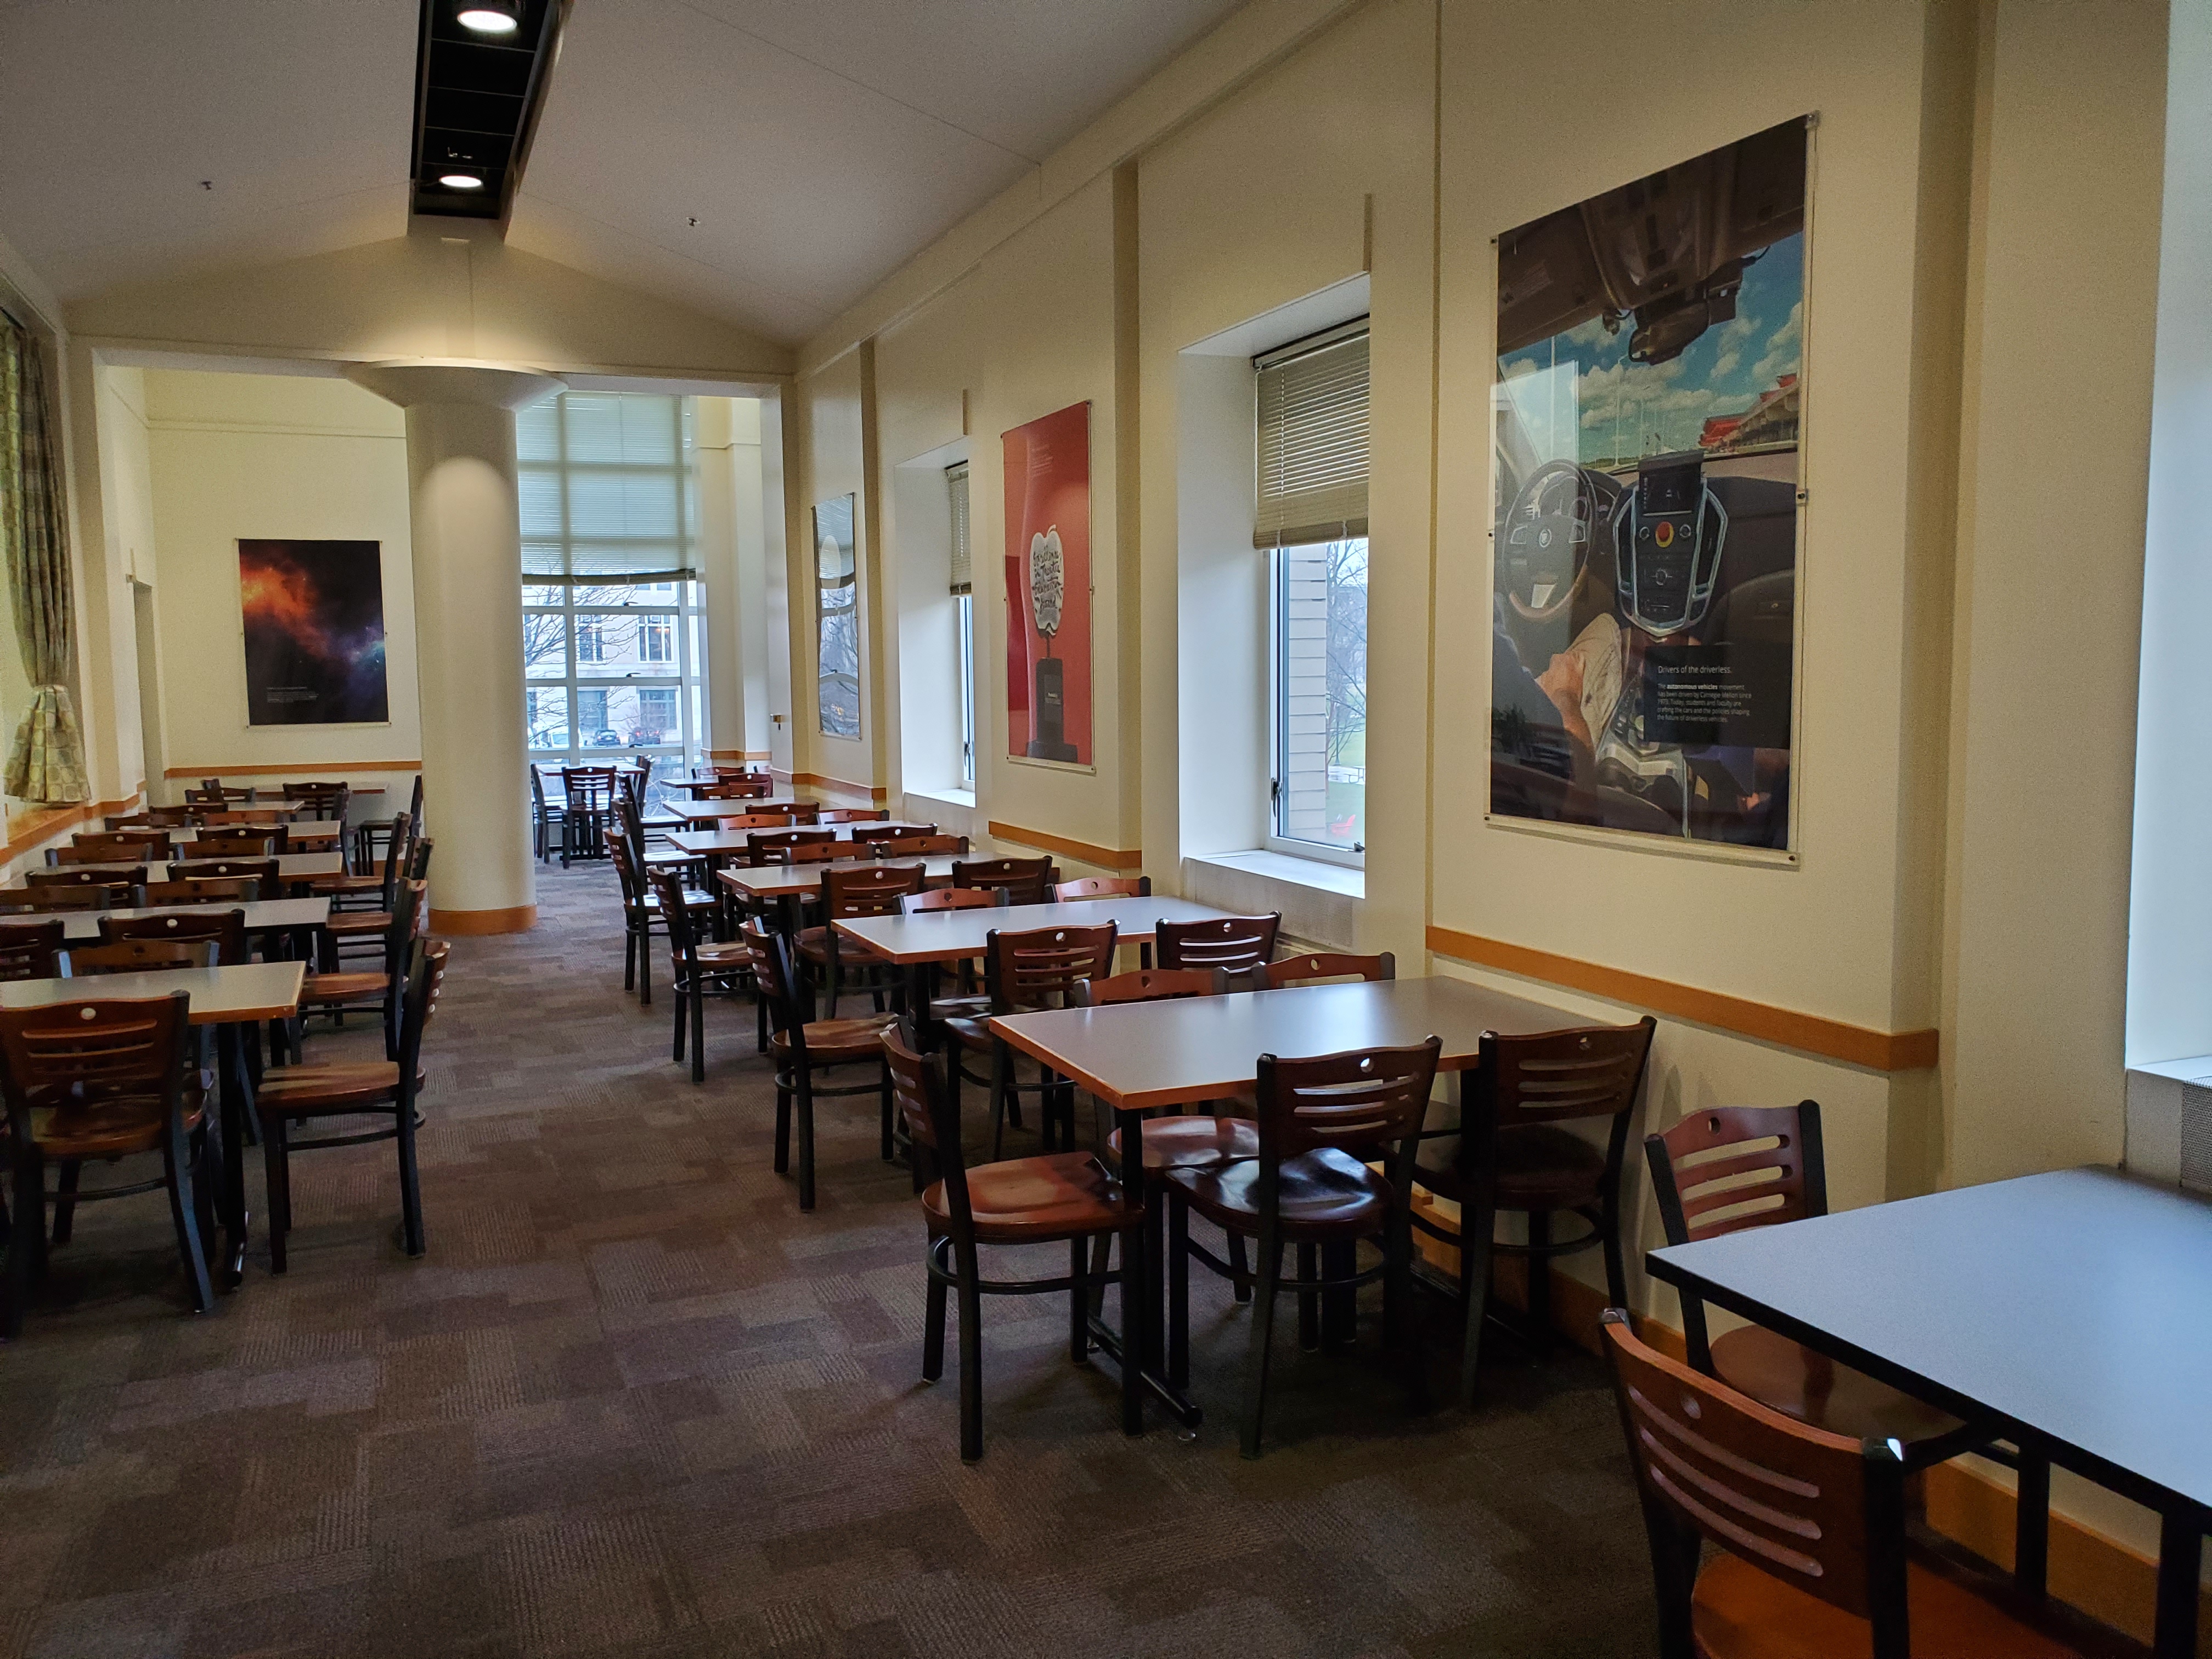 Photo of the Foster Room featuring cafeteria style seating